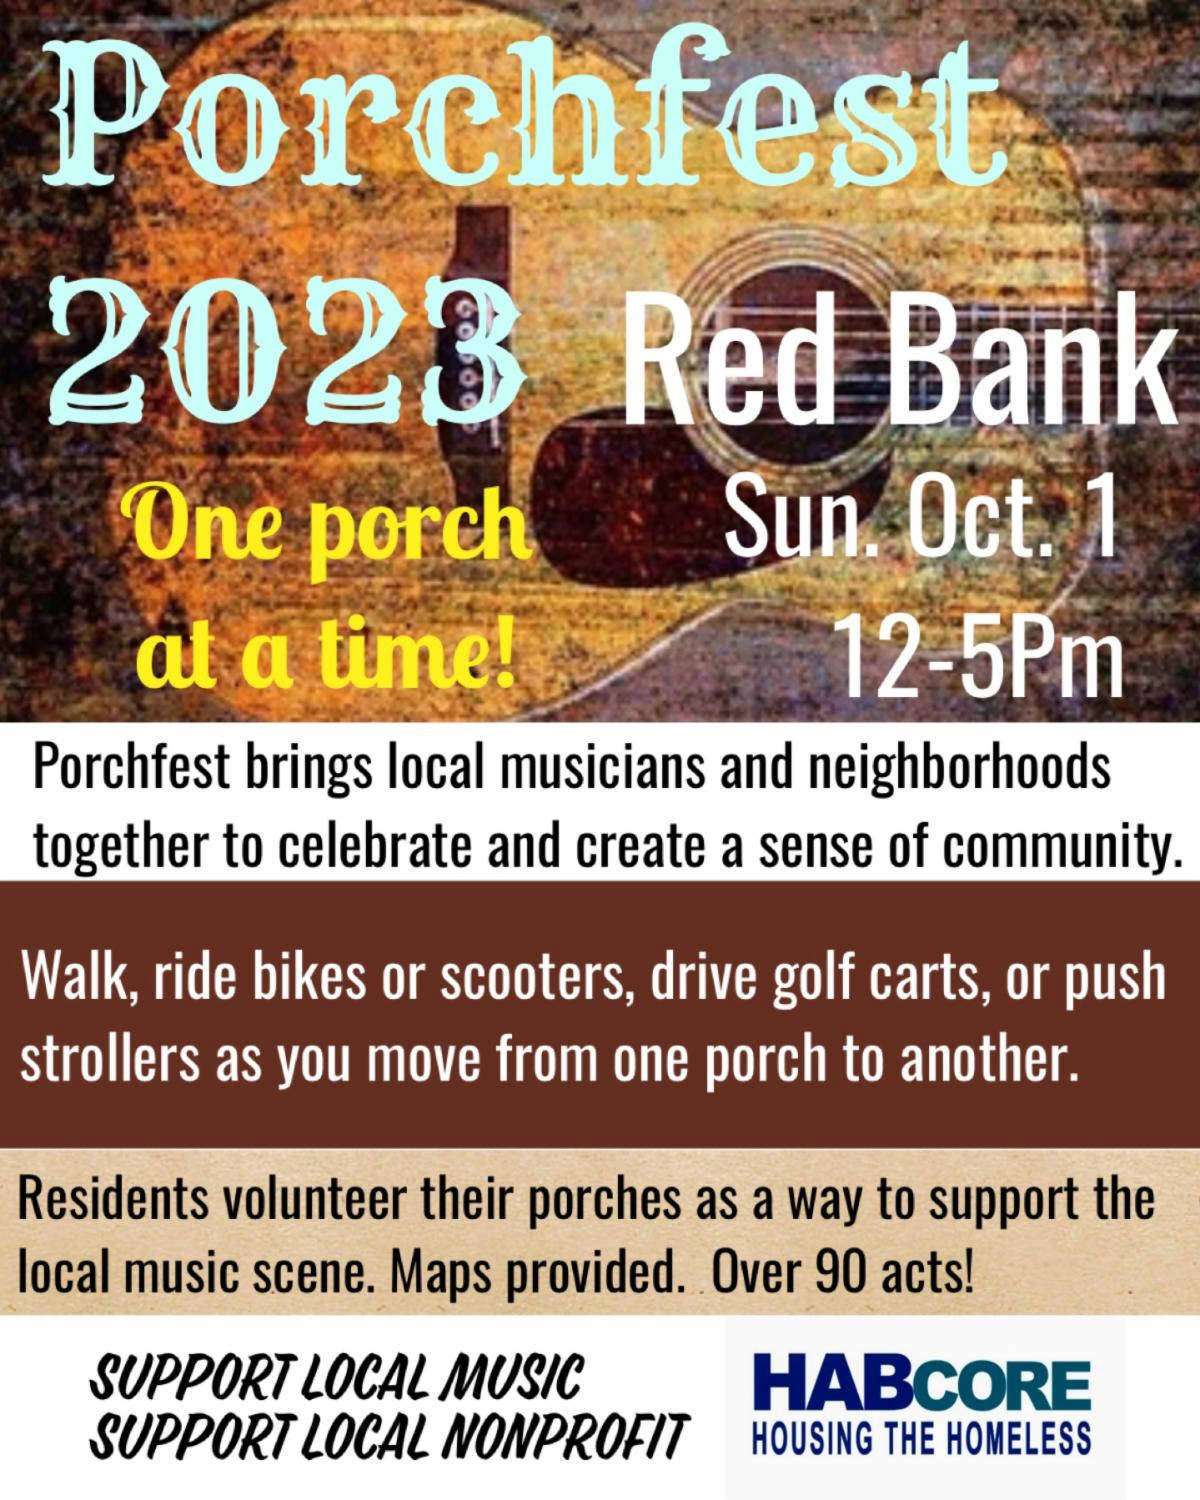 2nd Annual Red Bank Porchfest is Sunday, October 1